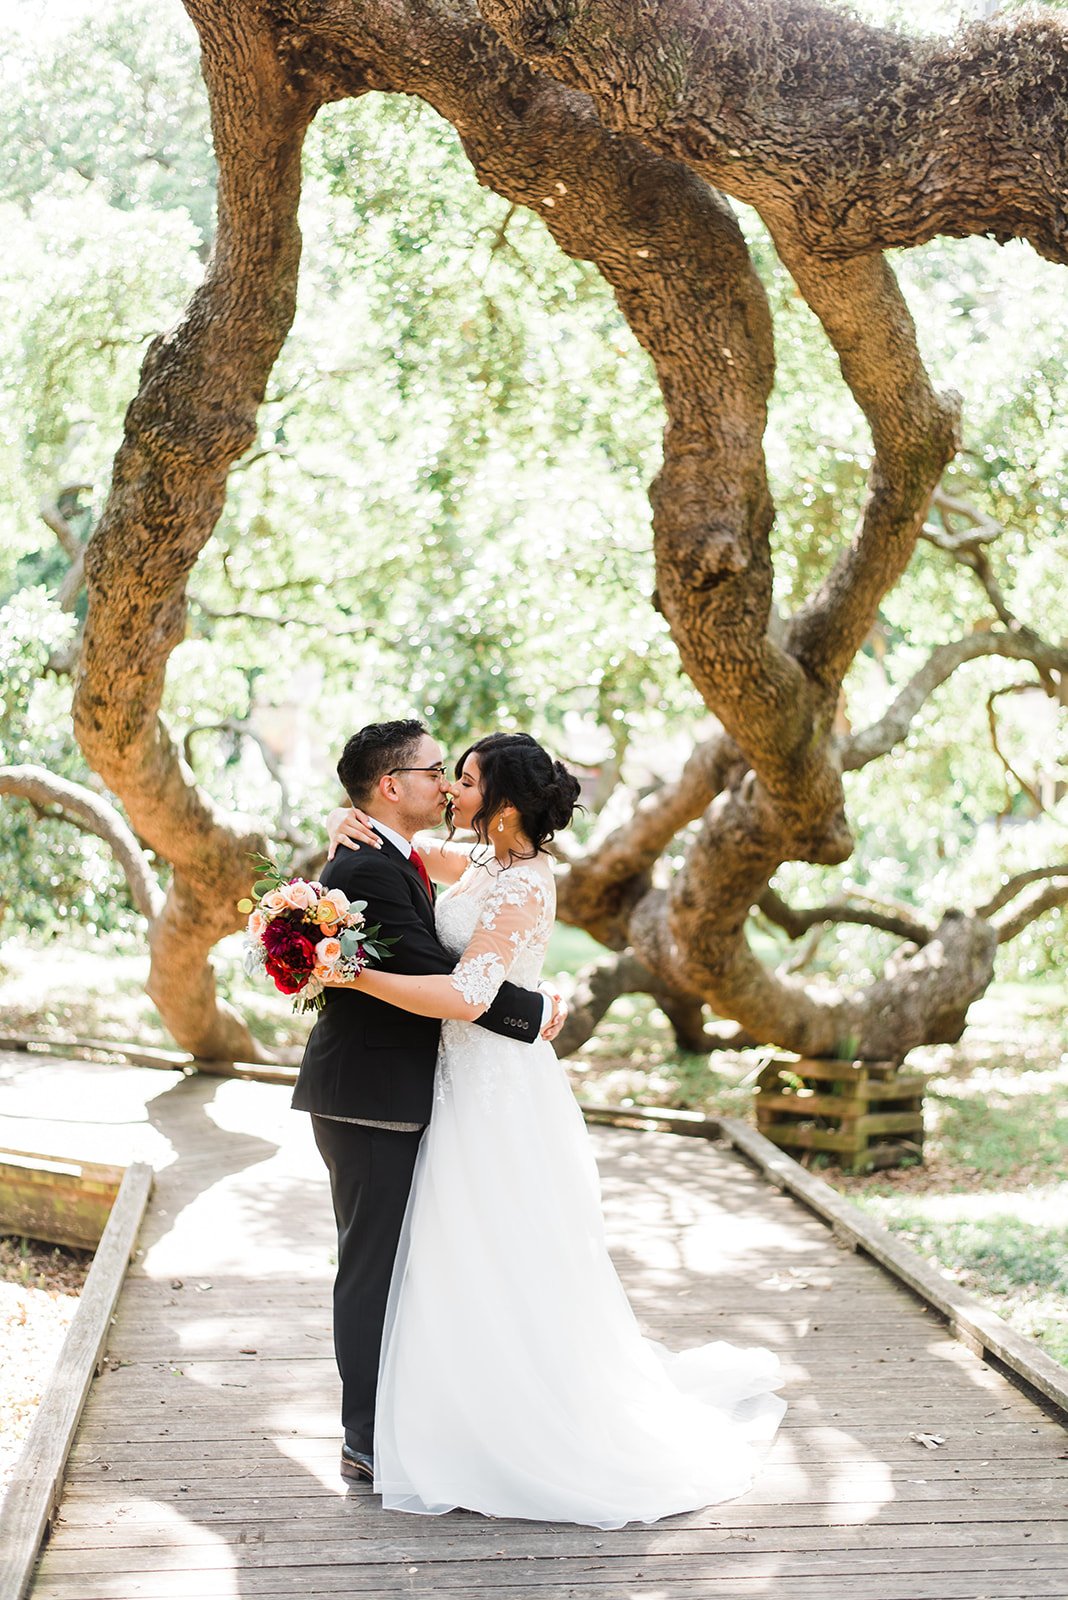 Light and airy Wedding photos of bride and groom at Treaty Oak Jacksonville Florida